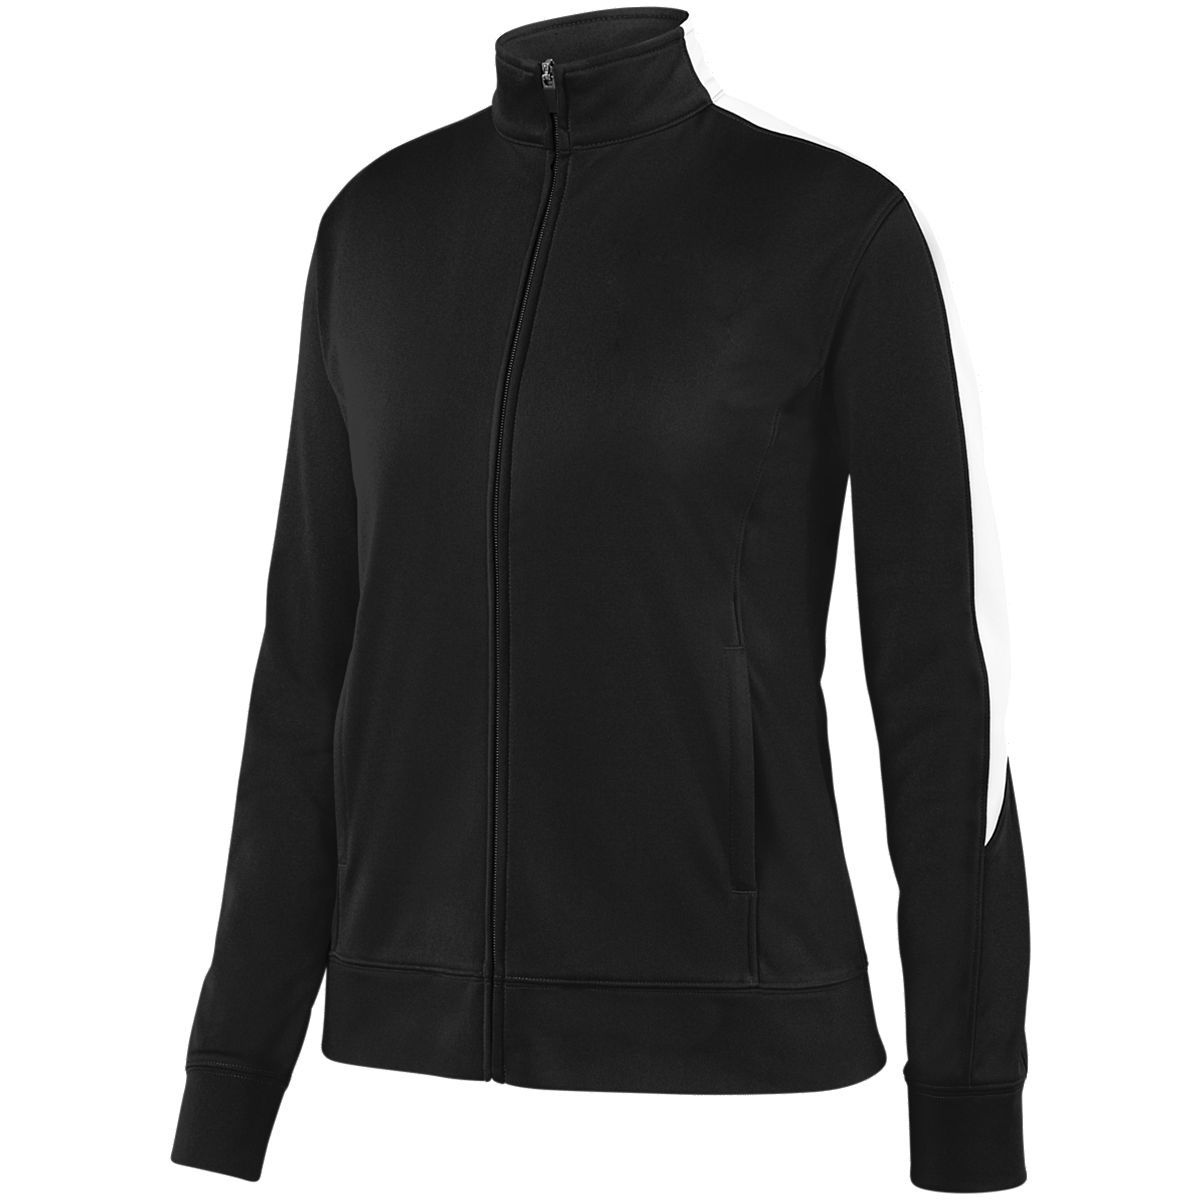 Augusta Sportswear Ladies Medalist Jacket 2.0 in Black/White  -Part of the Ladies, Ladies-Jacket, Augusta-Products, Outerwear product lines at KanaleyCreations.com